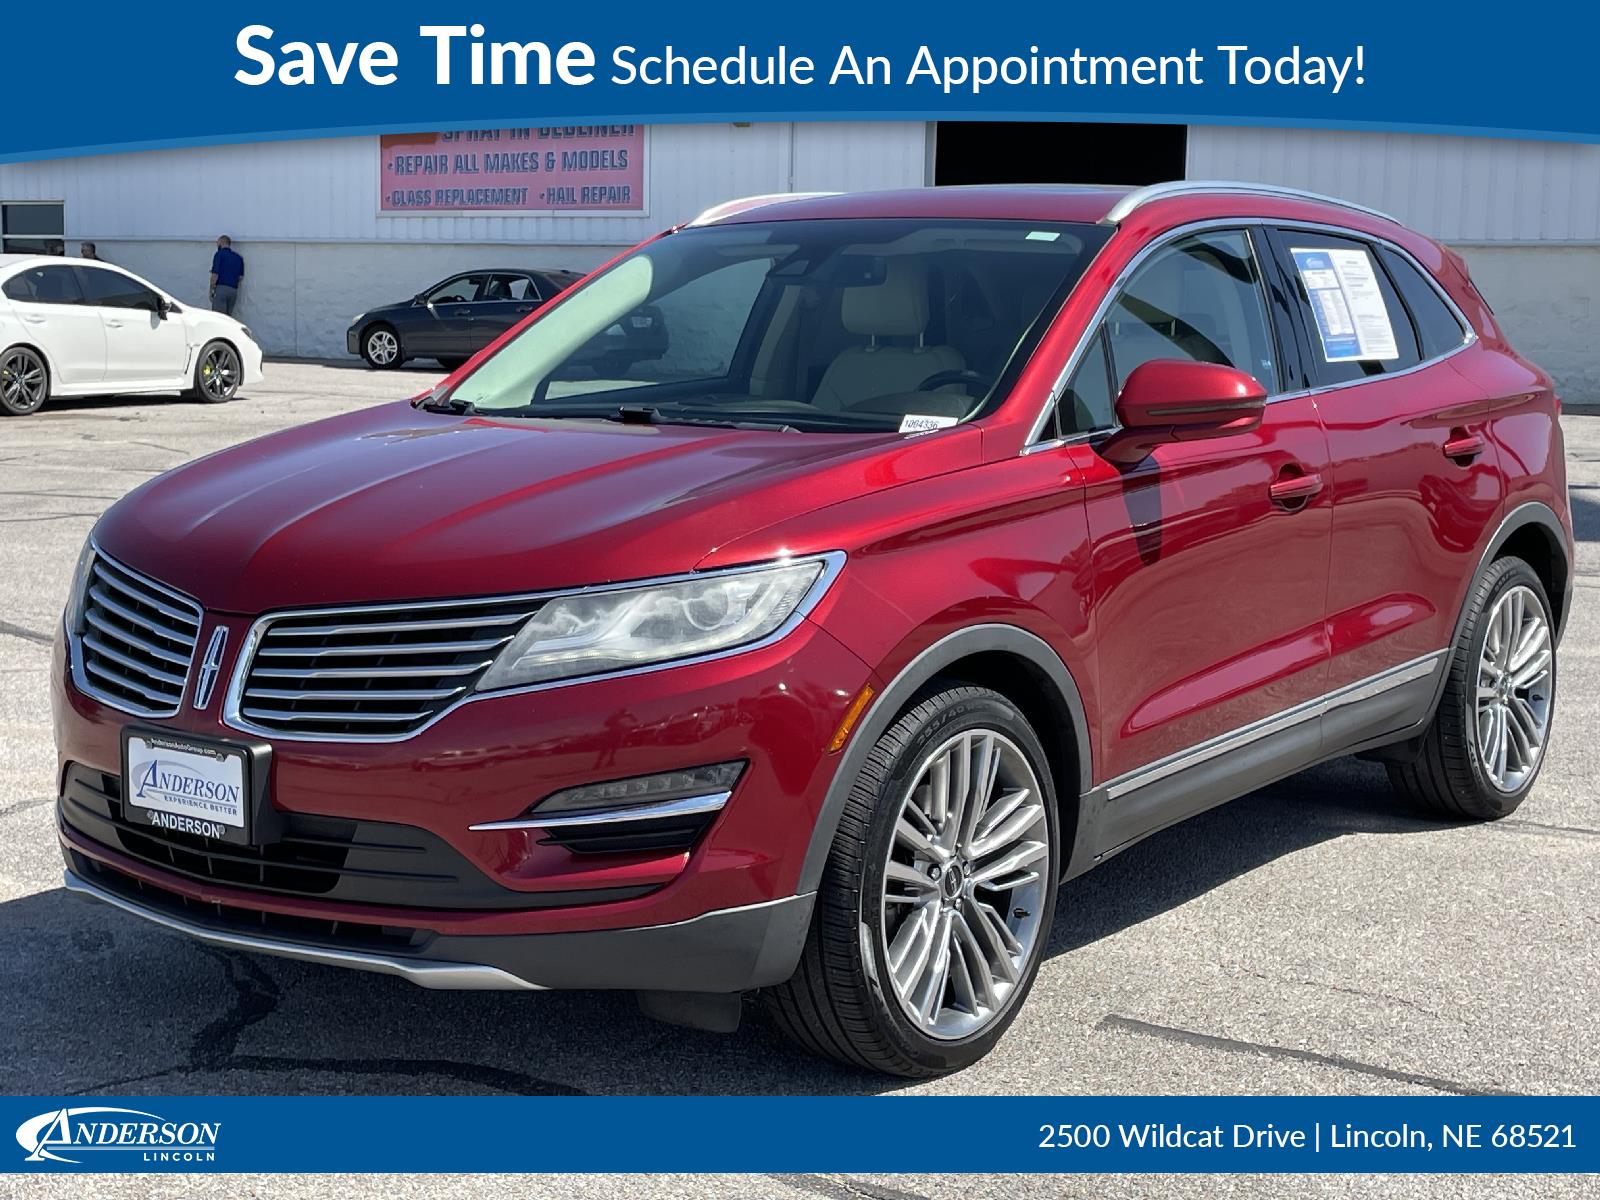 Used 2015 Lincoln MKC  Stock: 1004336